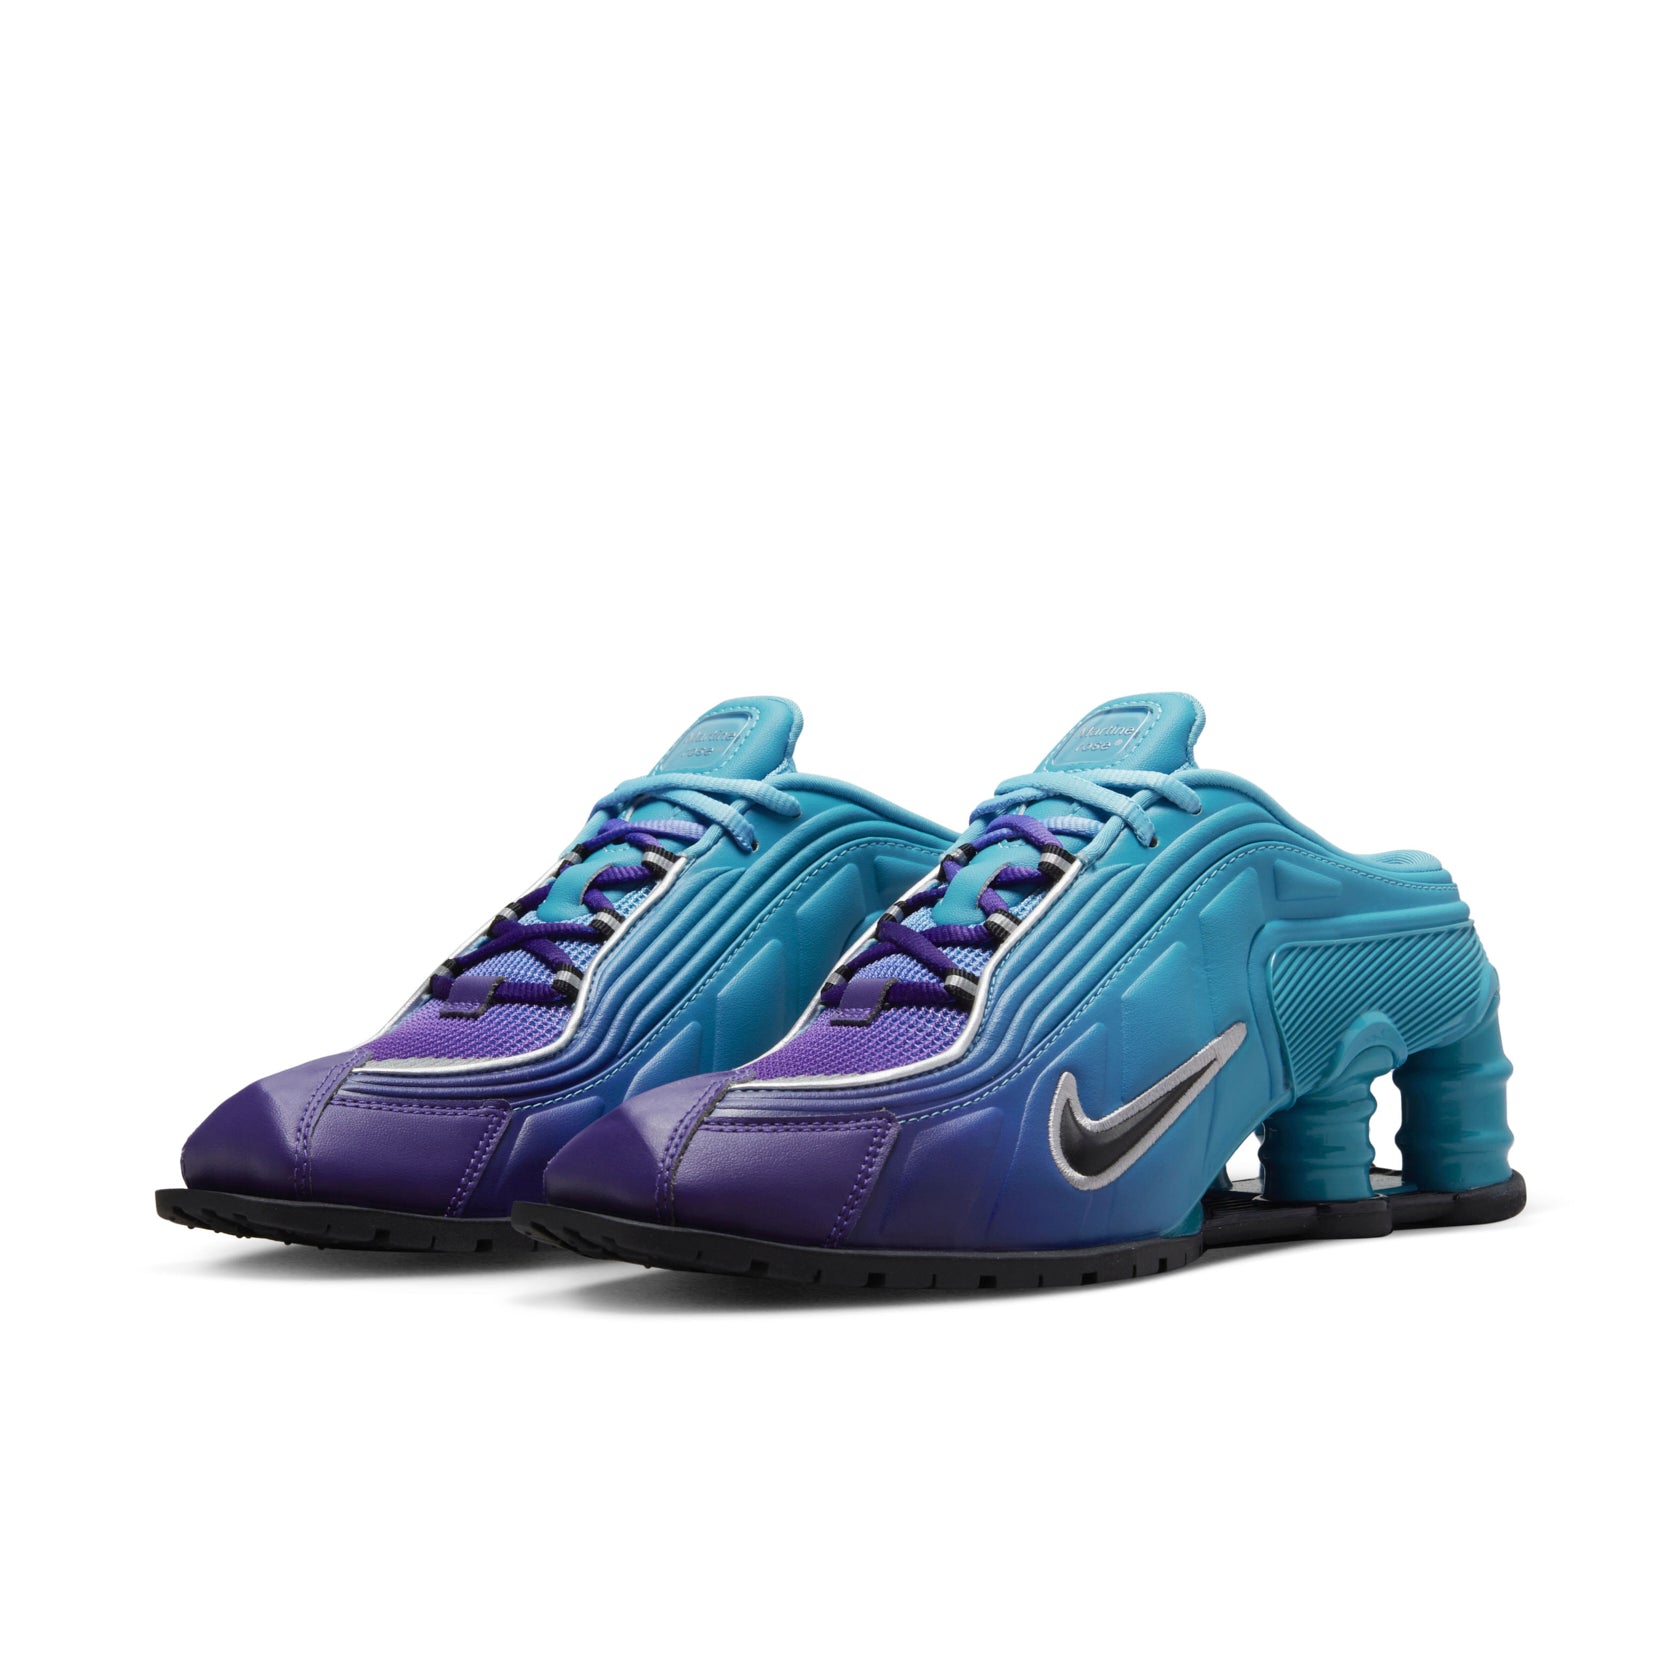 Nike Shox MR4 in Blue | Official Online Shop